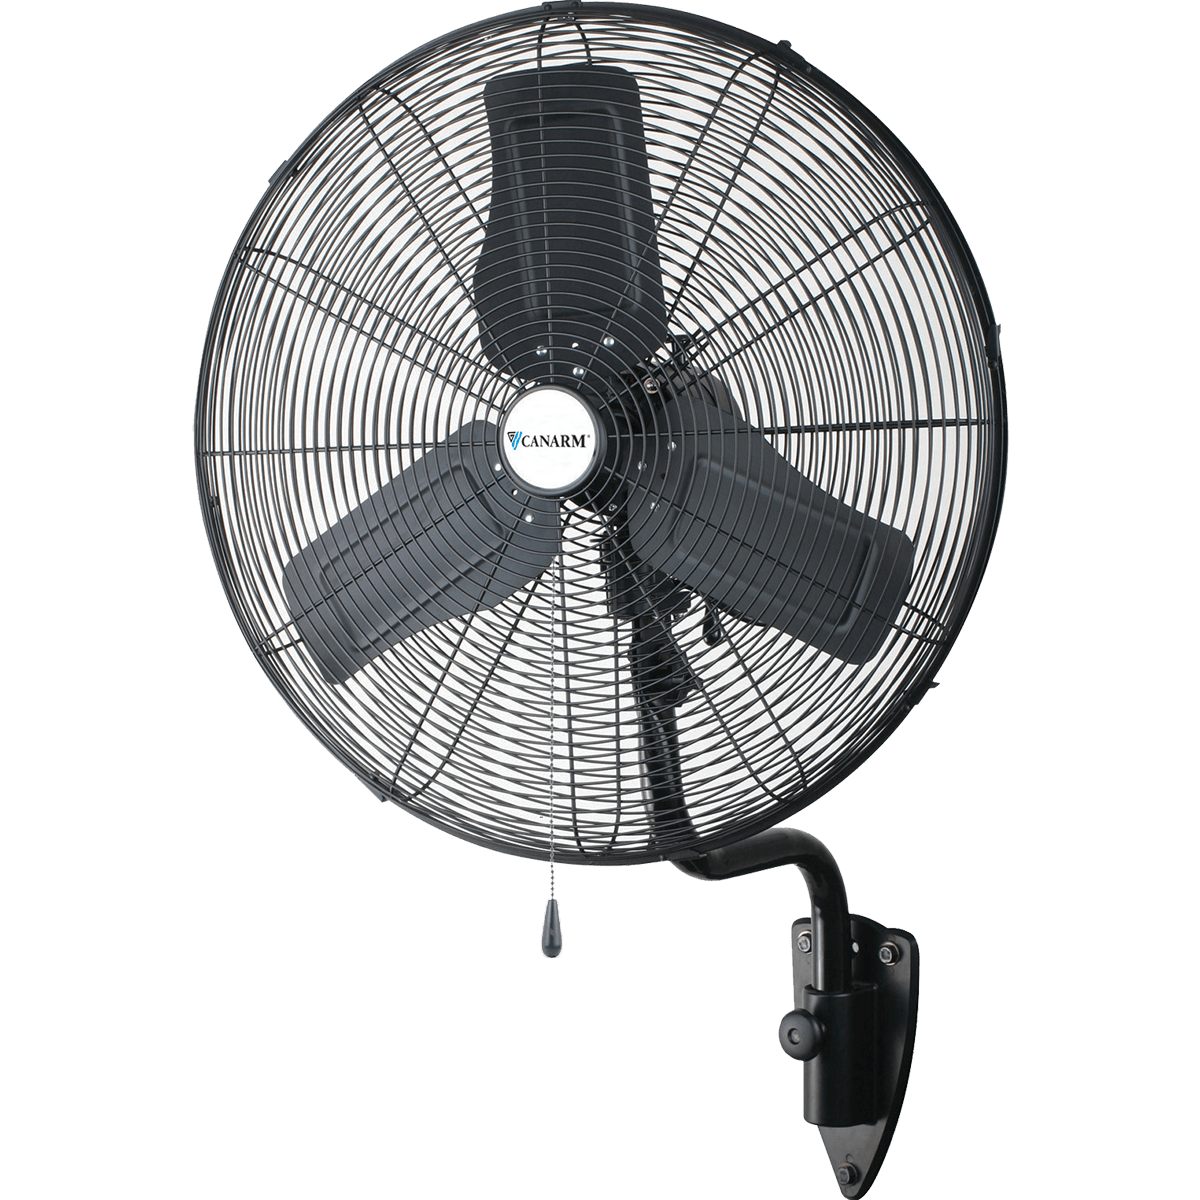 Canarm Speed Oscillating Wall Mount Commercial Fan Inch